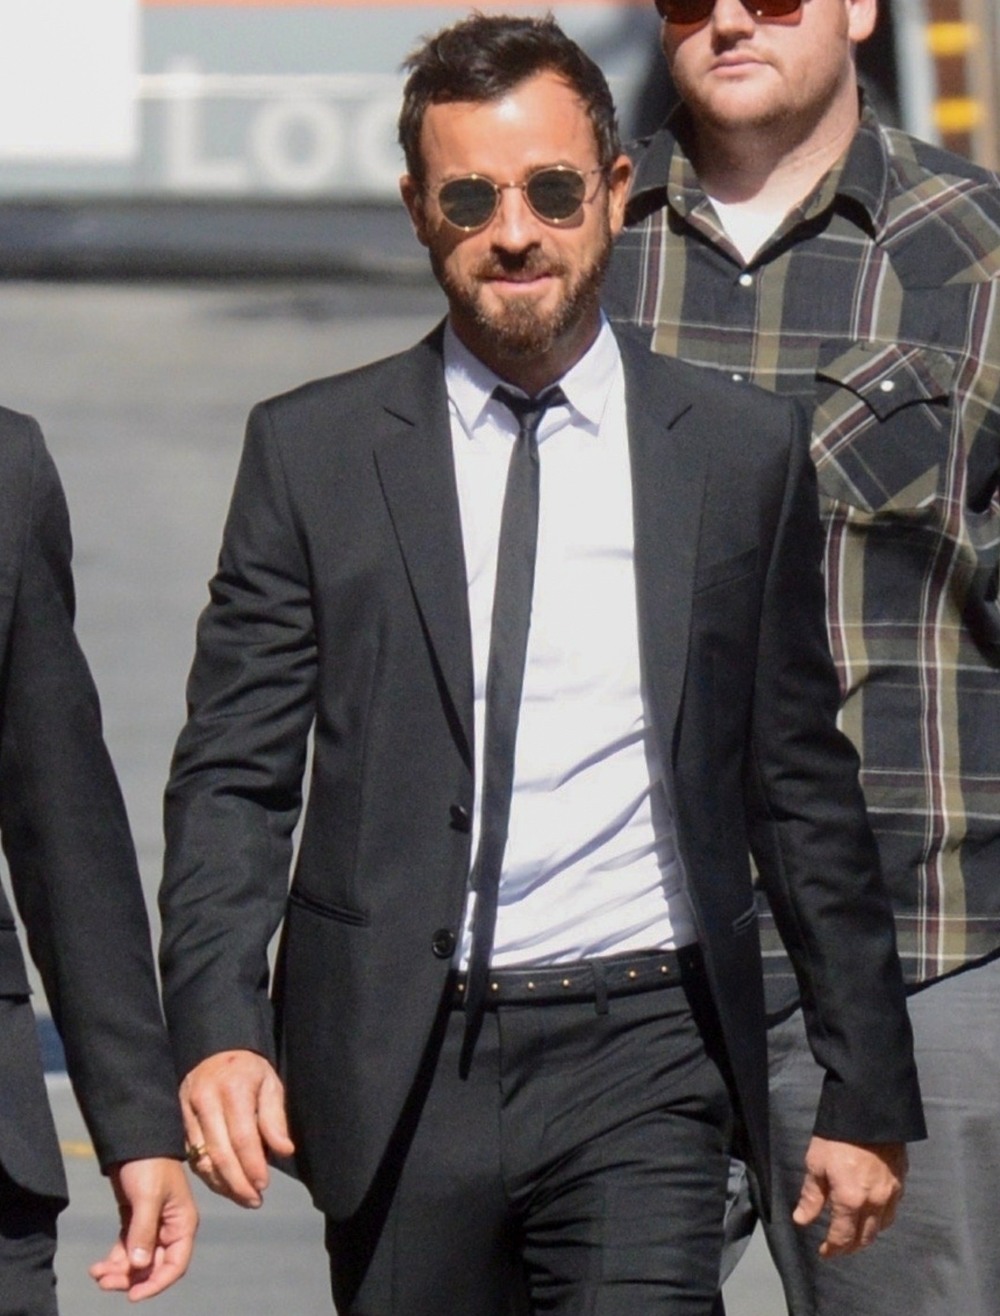 A dapper Justin Theroux looks arrives for his appearance on 'Jimmy Kimmel Live!'